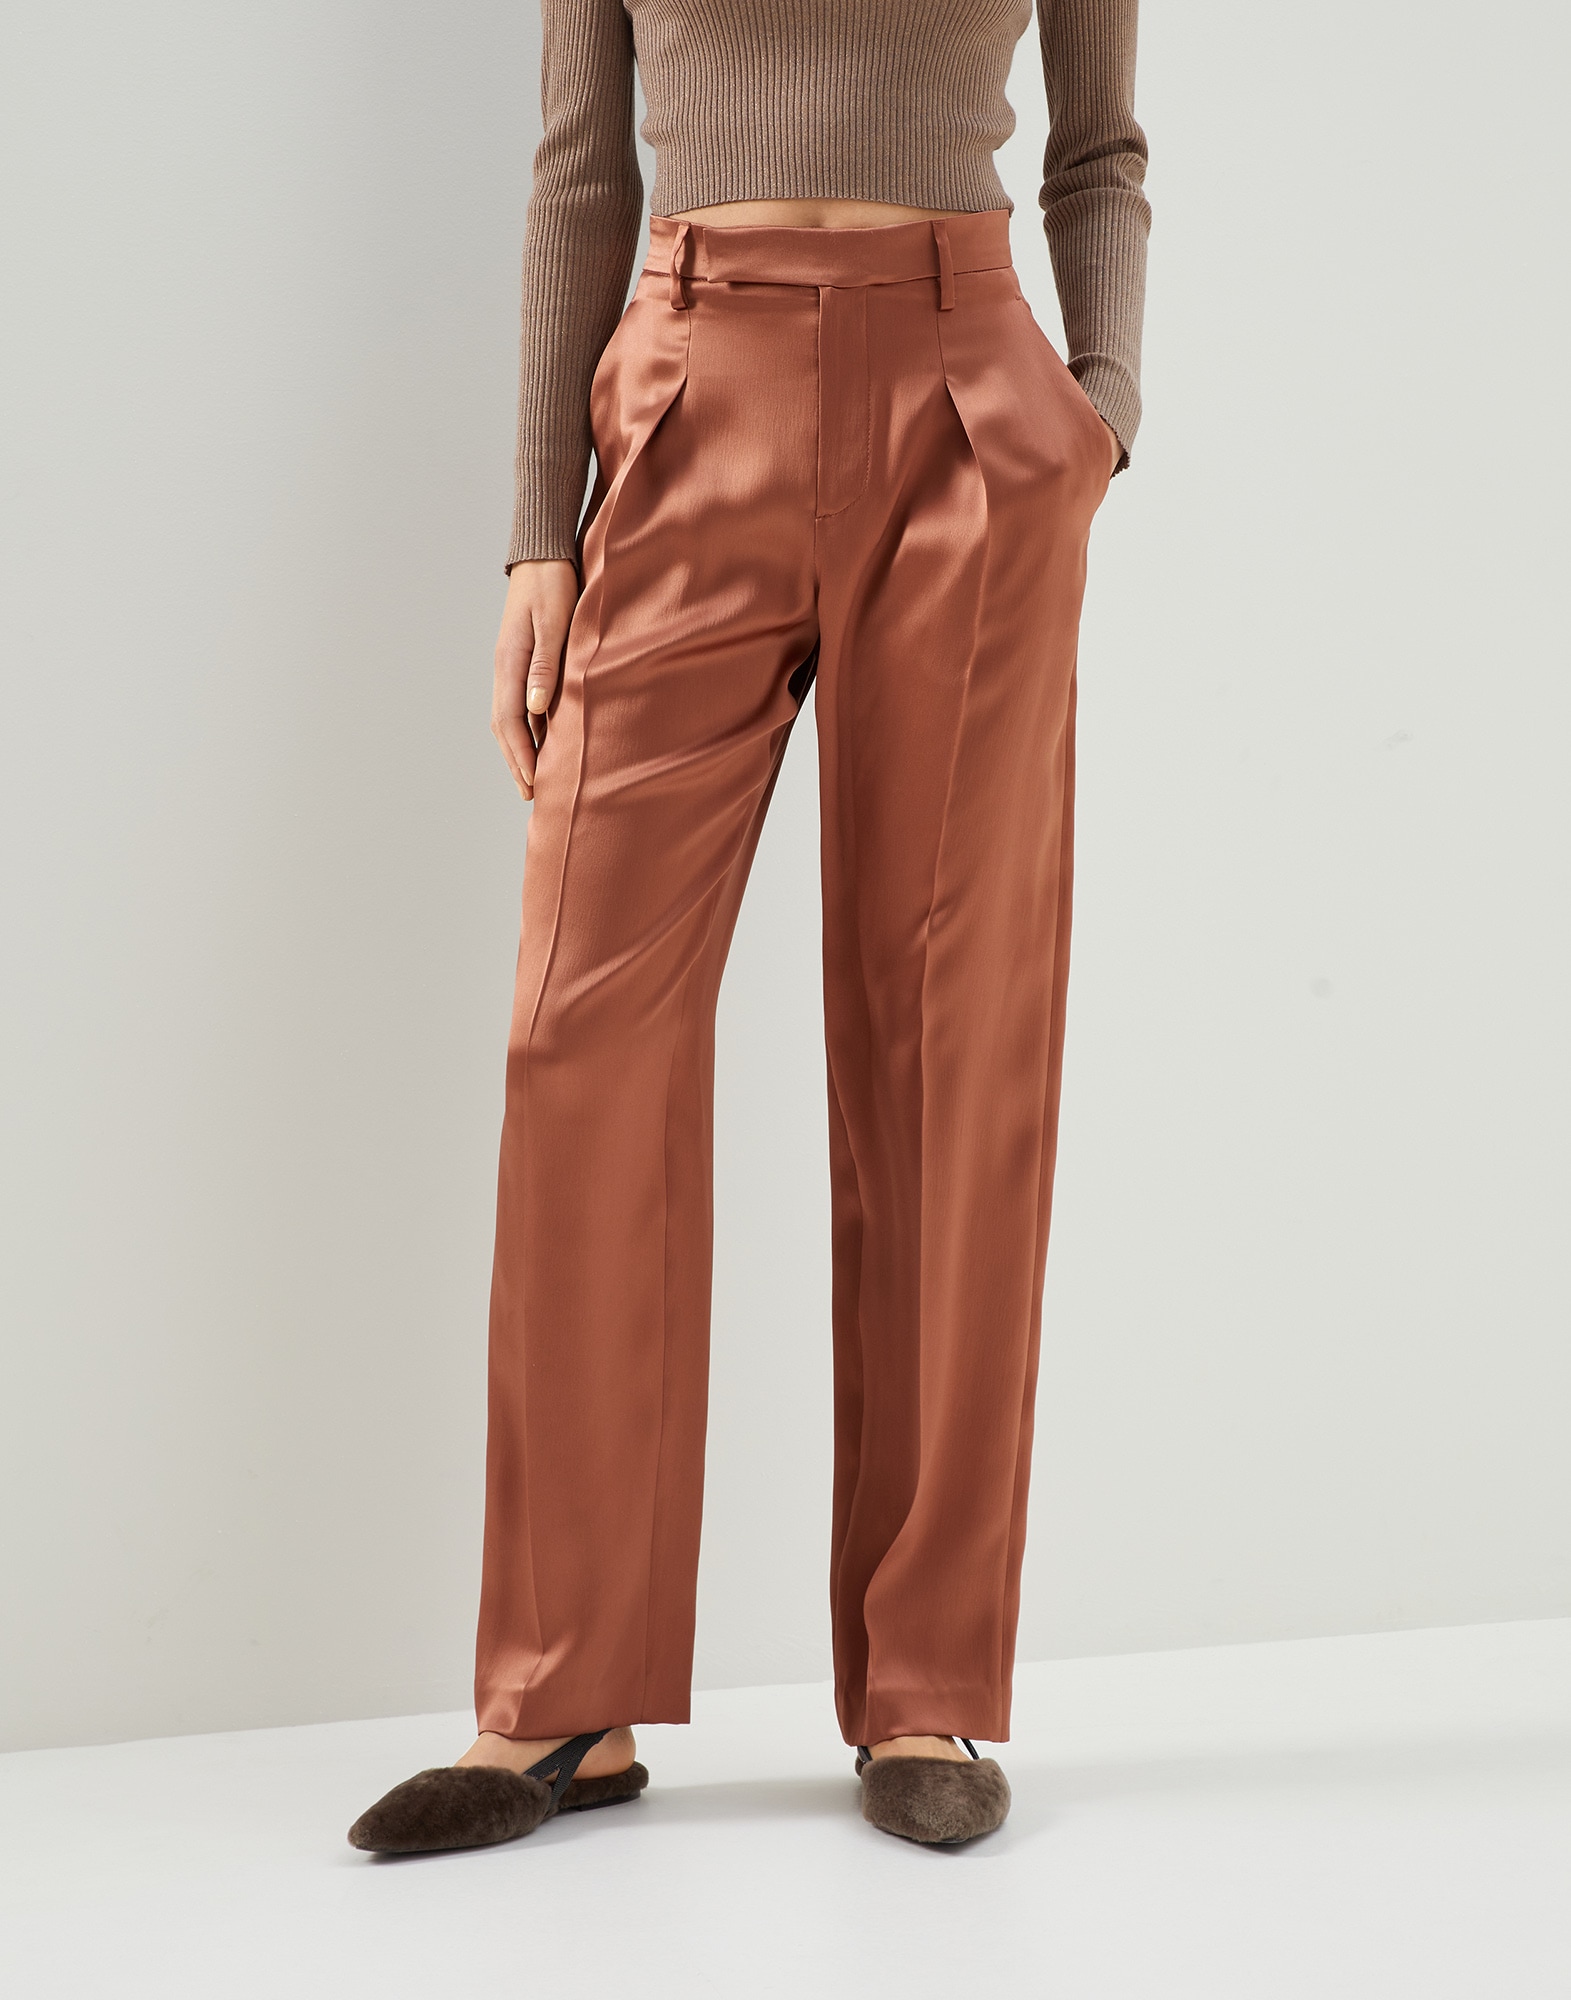 Loose tailored trousers